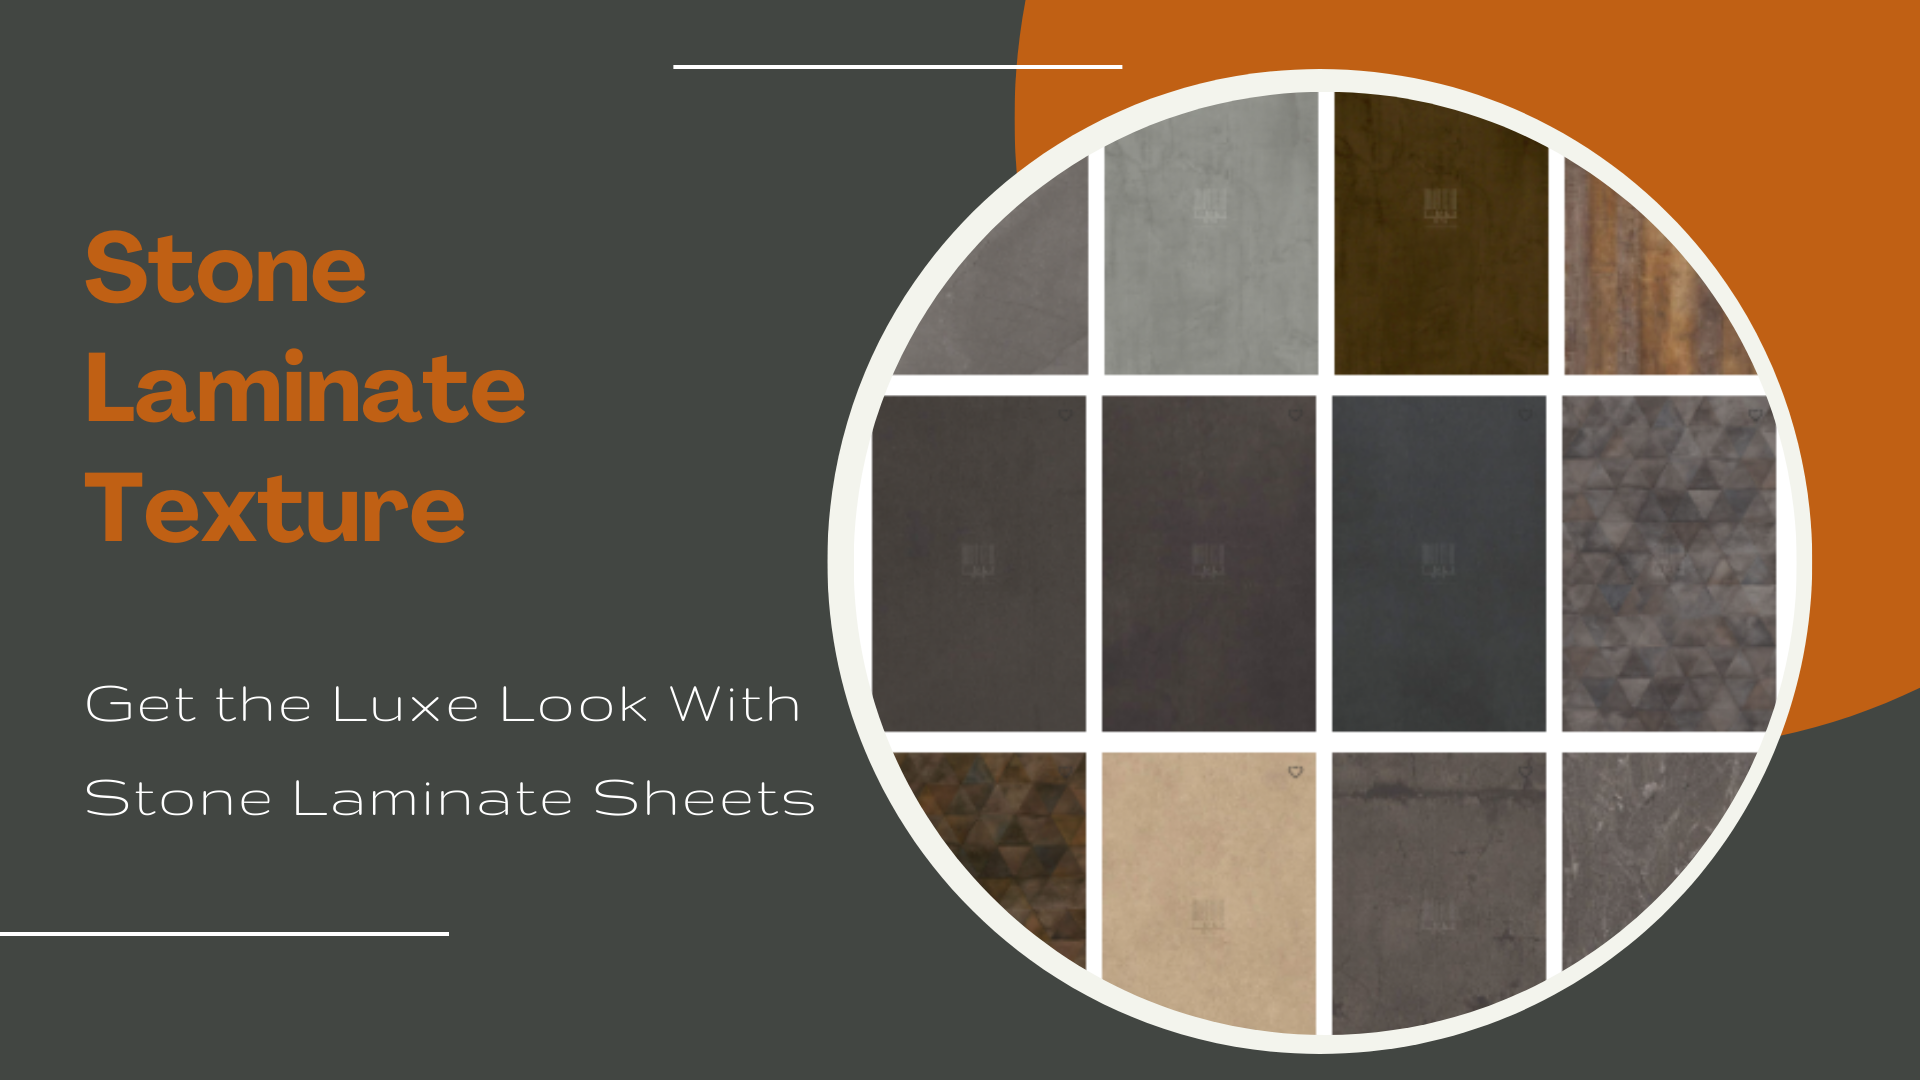 Stone Laminate Texture - Get the Luxe Look With Stone Laminate Sheets